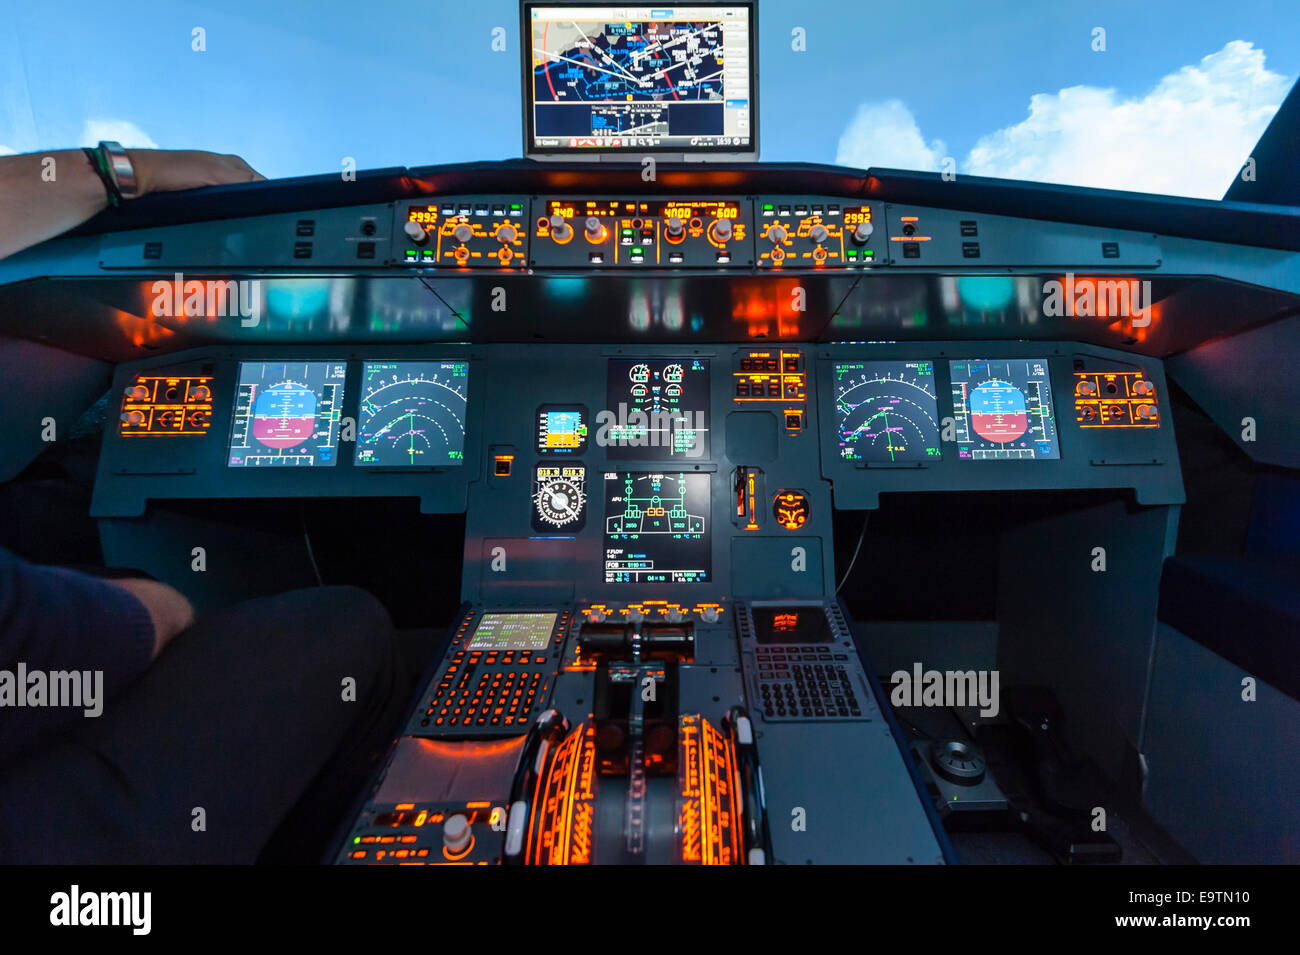 Cockpit Of An Airbus A320 Flight Simulator That Is Used For